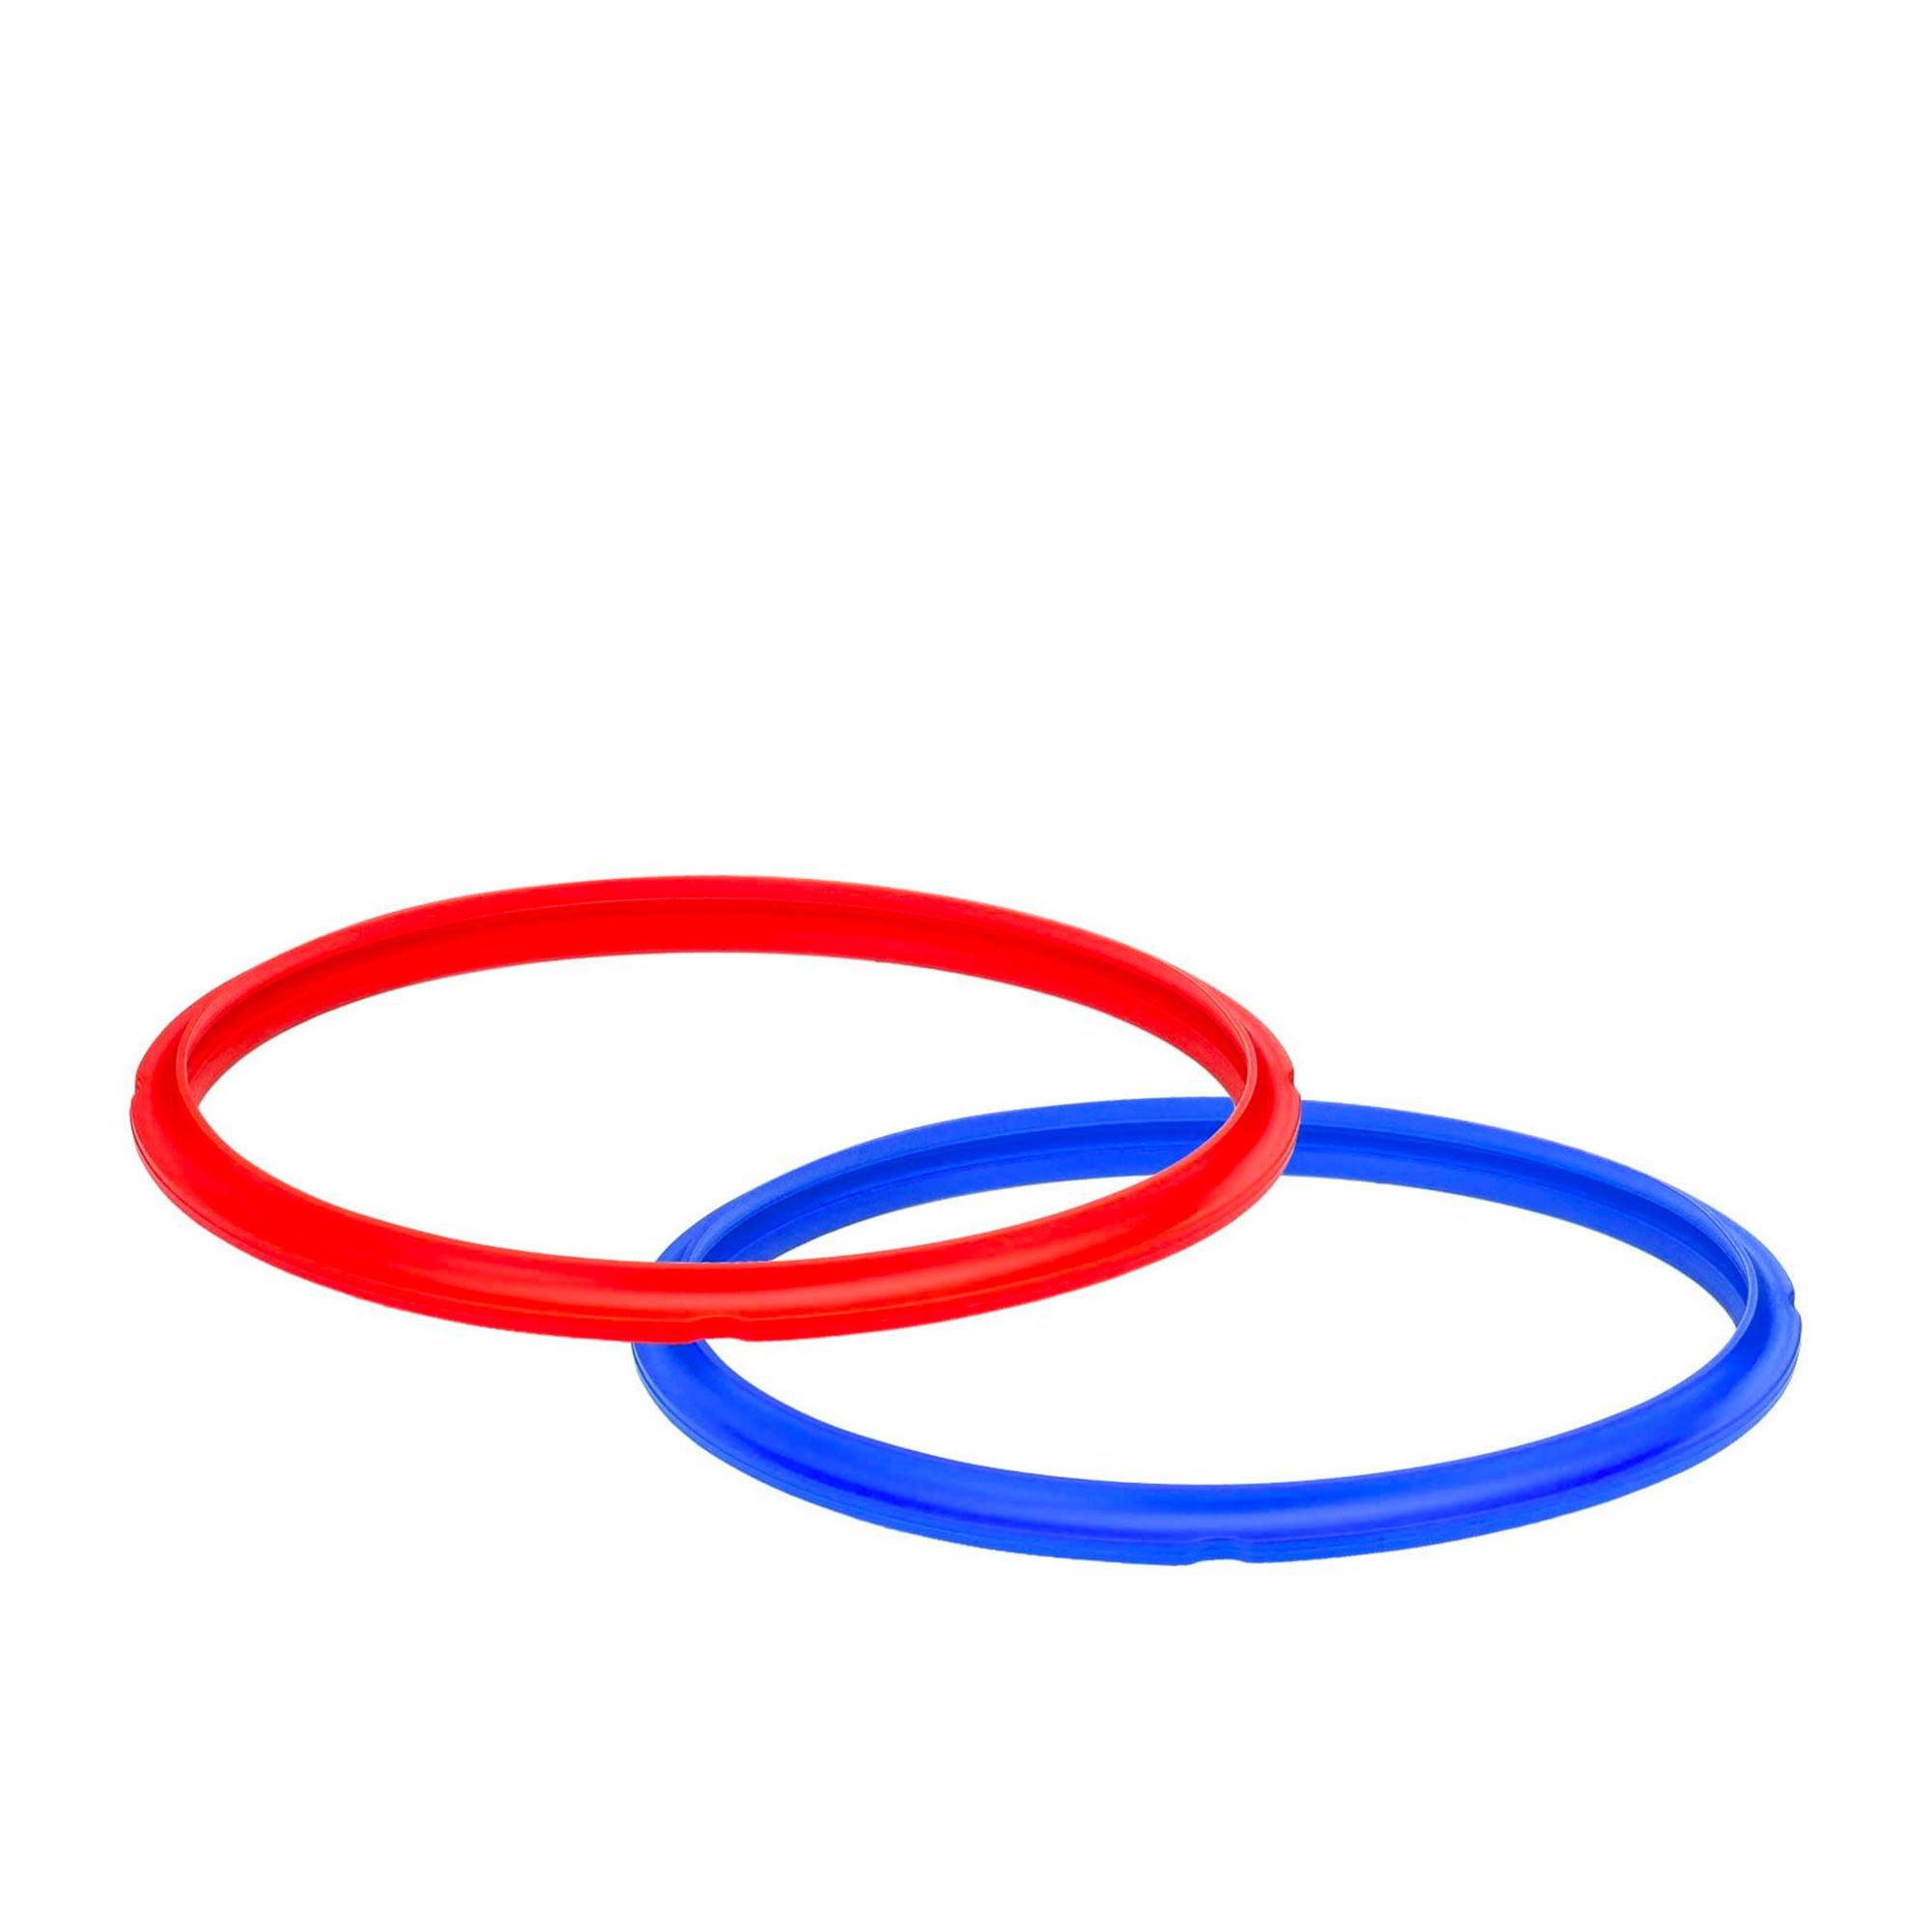 Instant Pot Silicone Sealing Ring 2pk for 8L Models Image 2